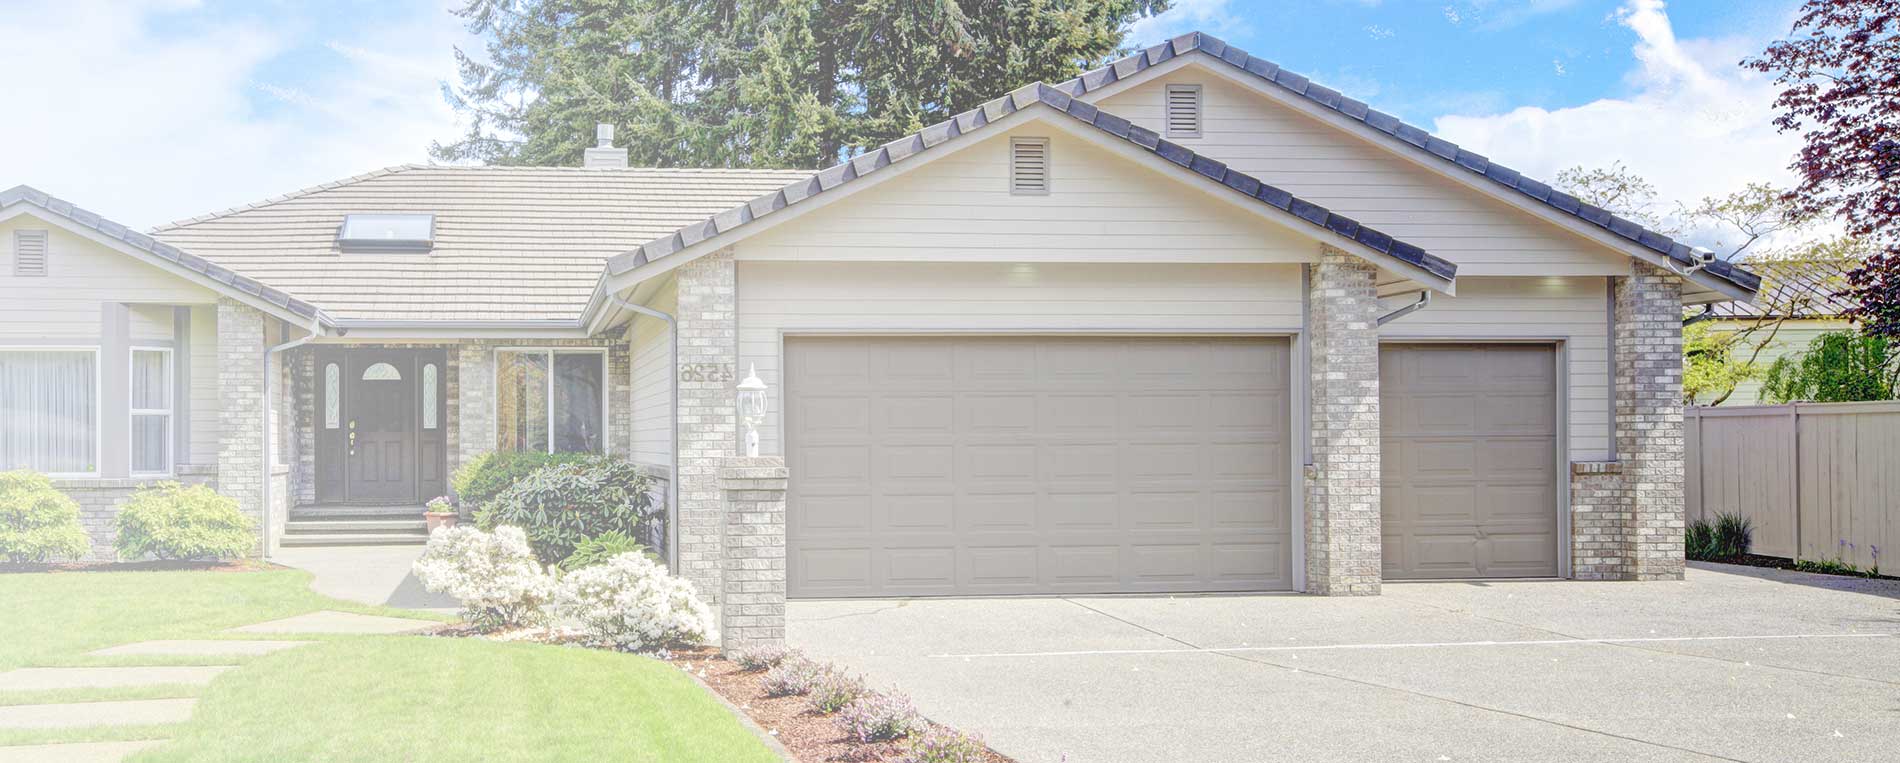 How To Lower The Risks Associated With Your Garage Door